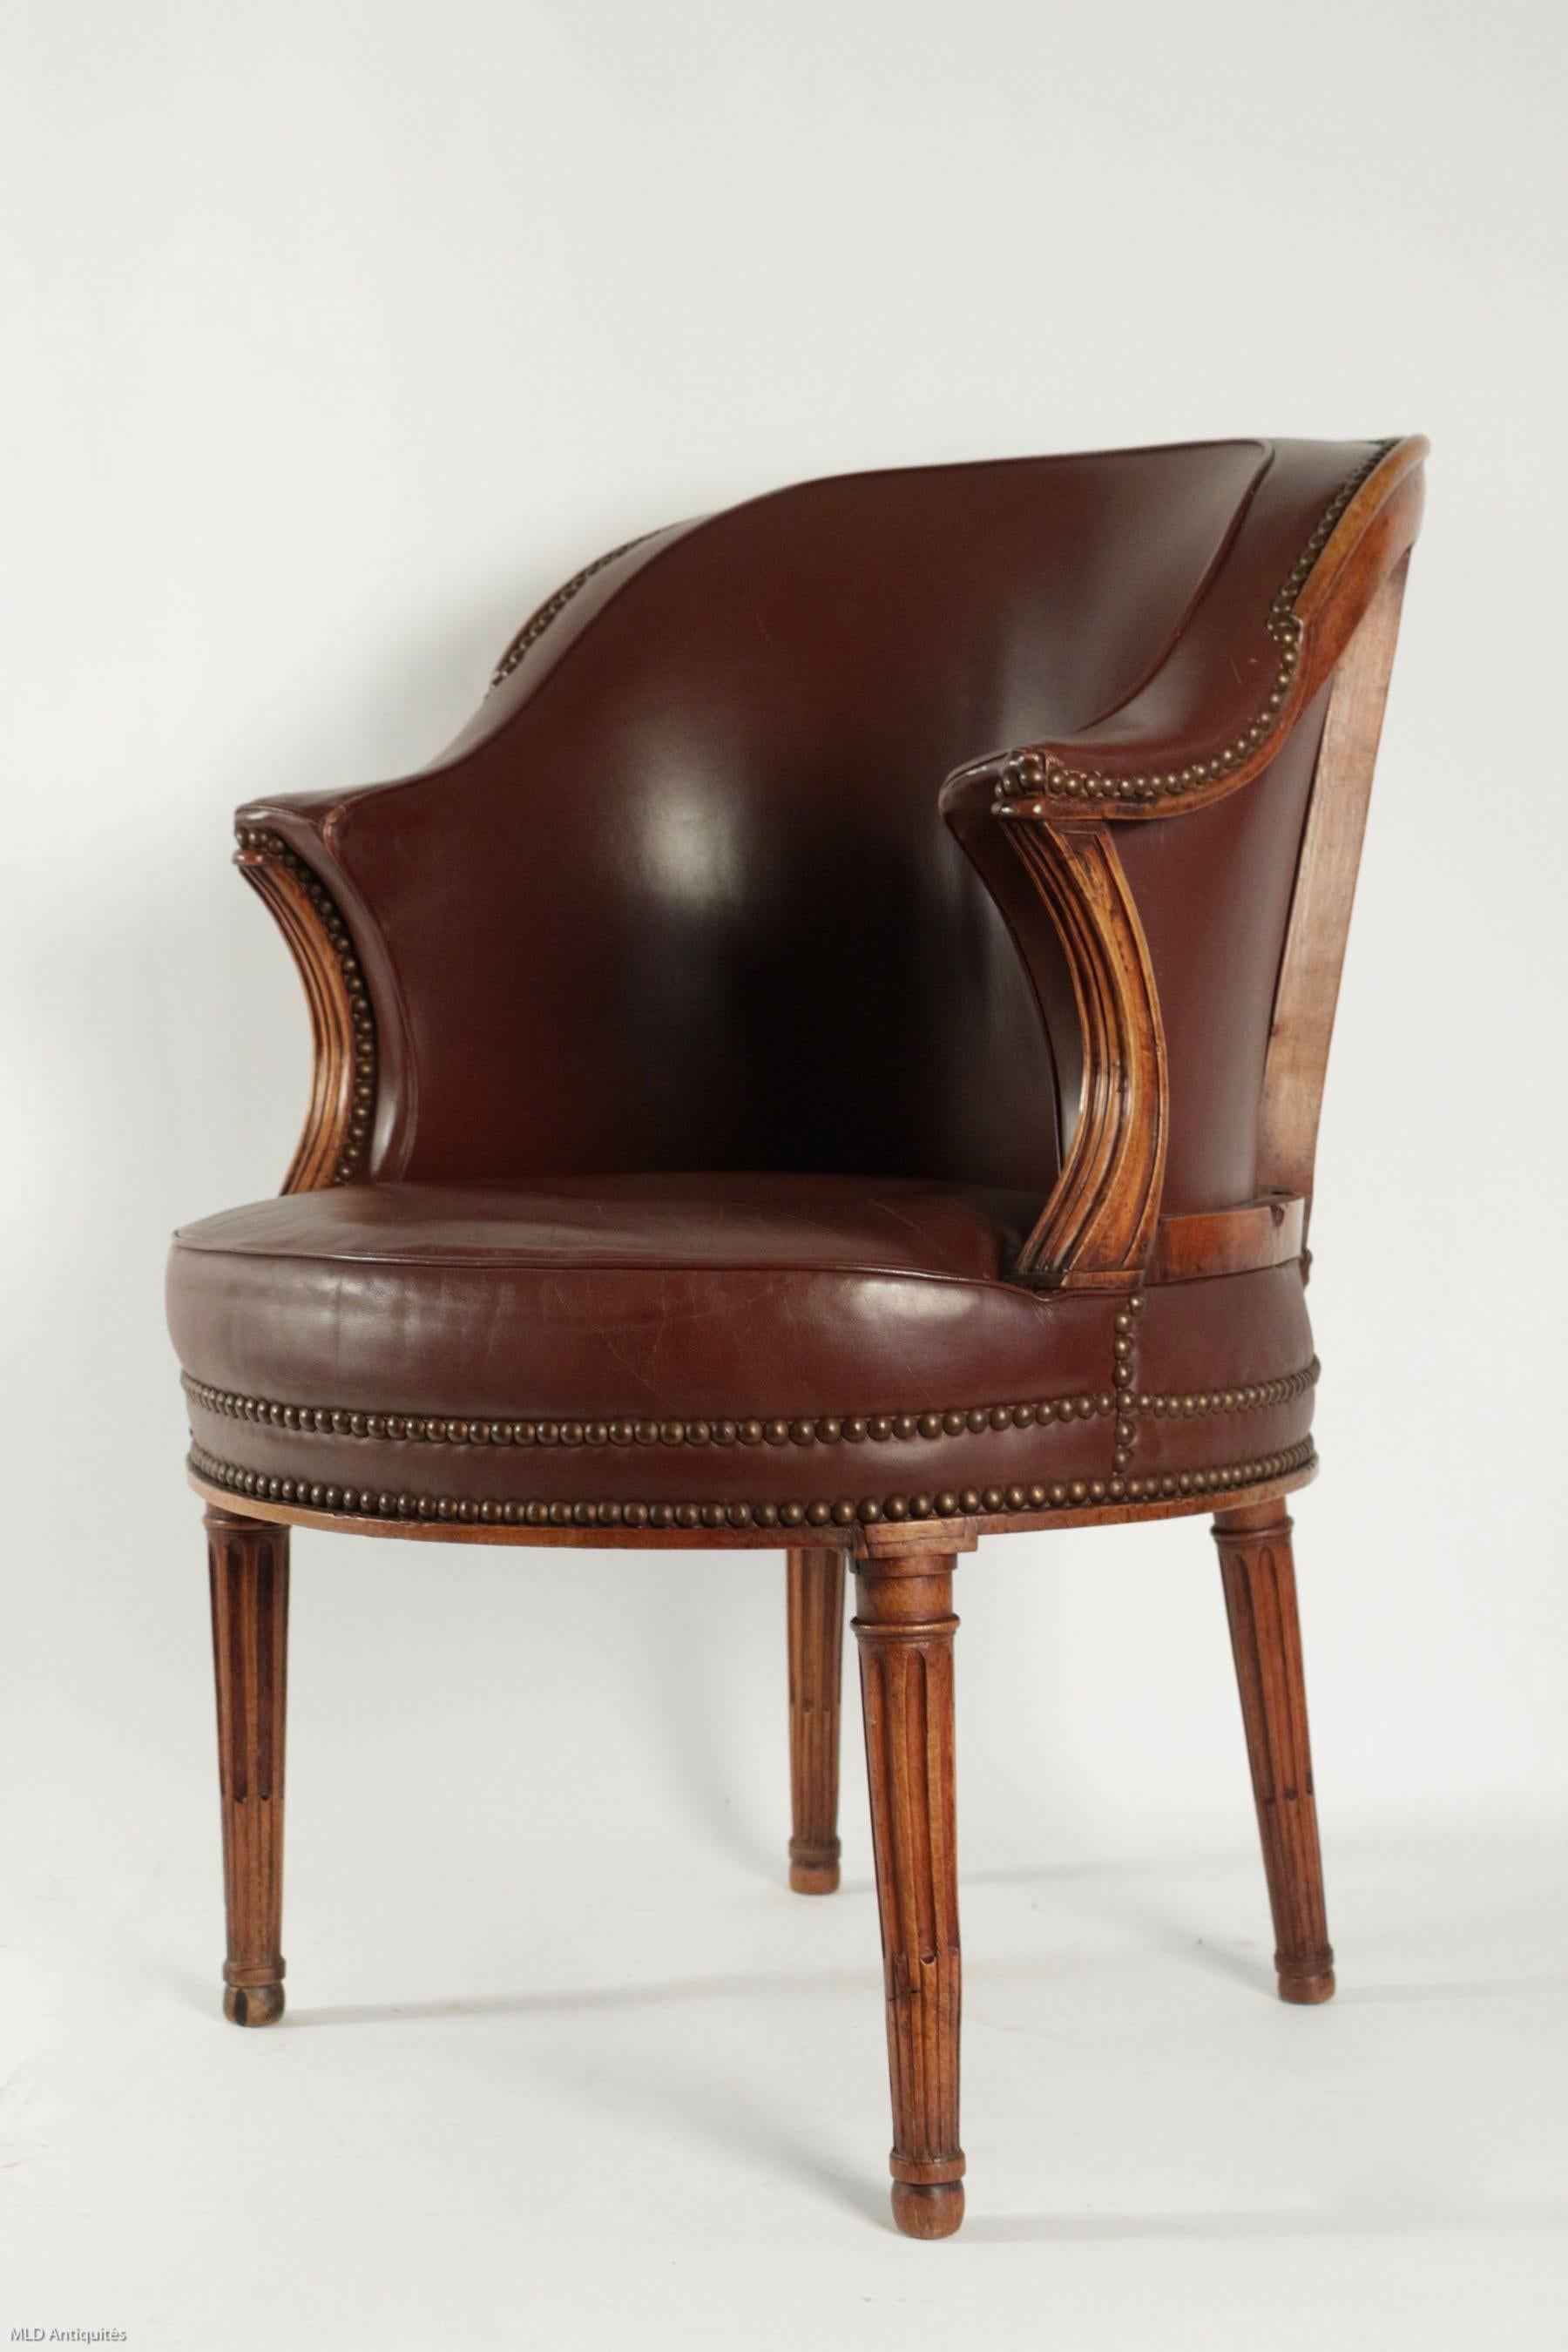 Hand-Carved French Louis XVI Period Desk Armchair by Louis Magdelaine Pluvinet, circa 1780